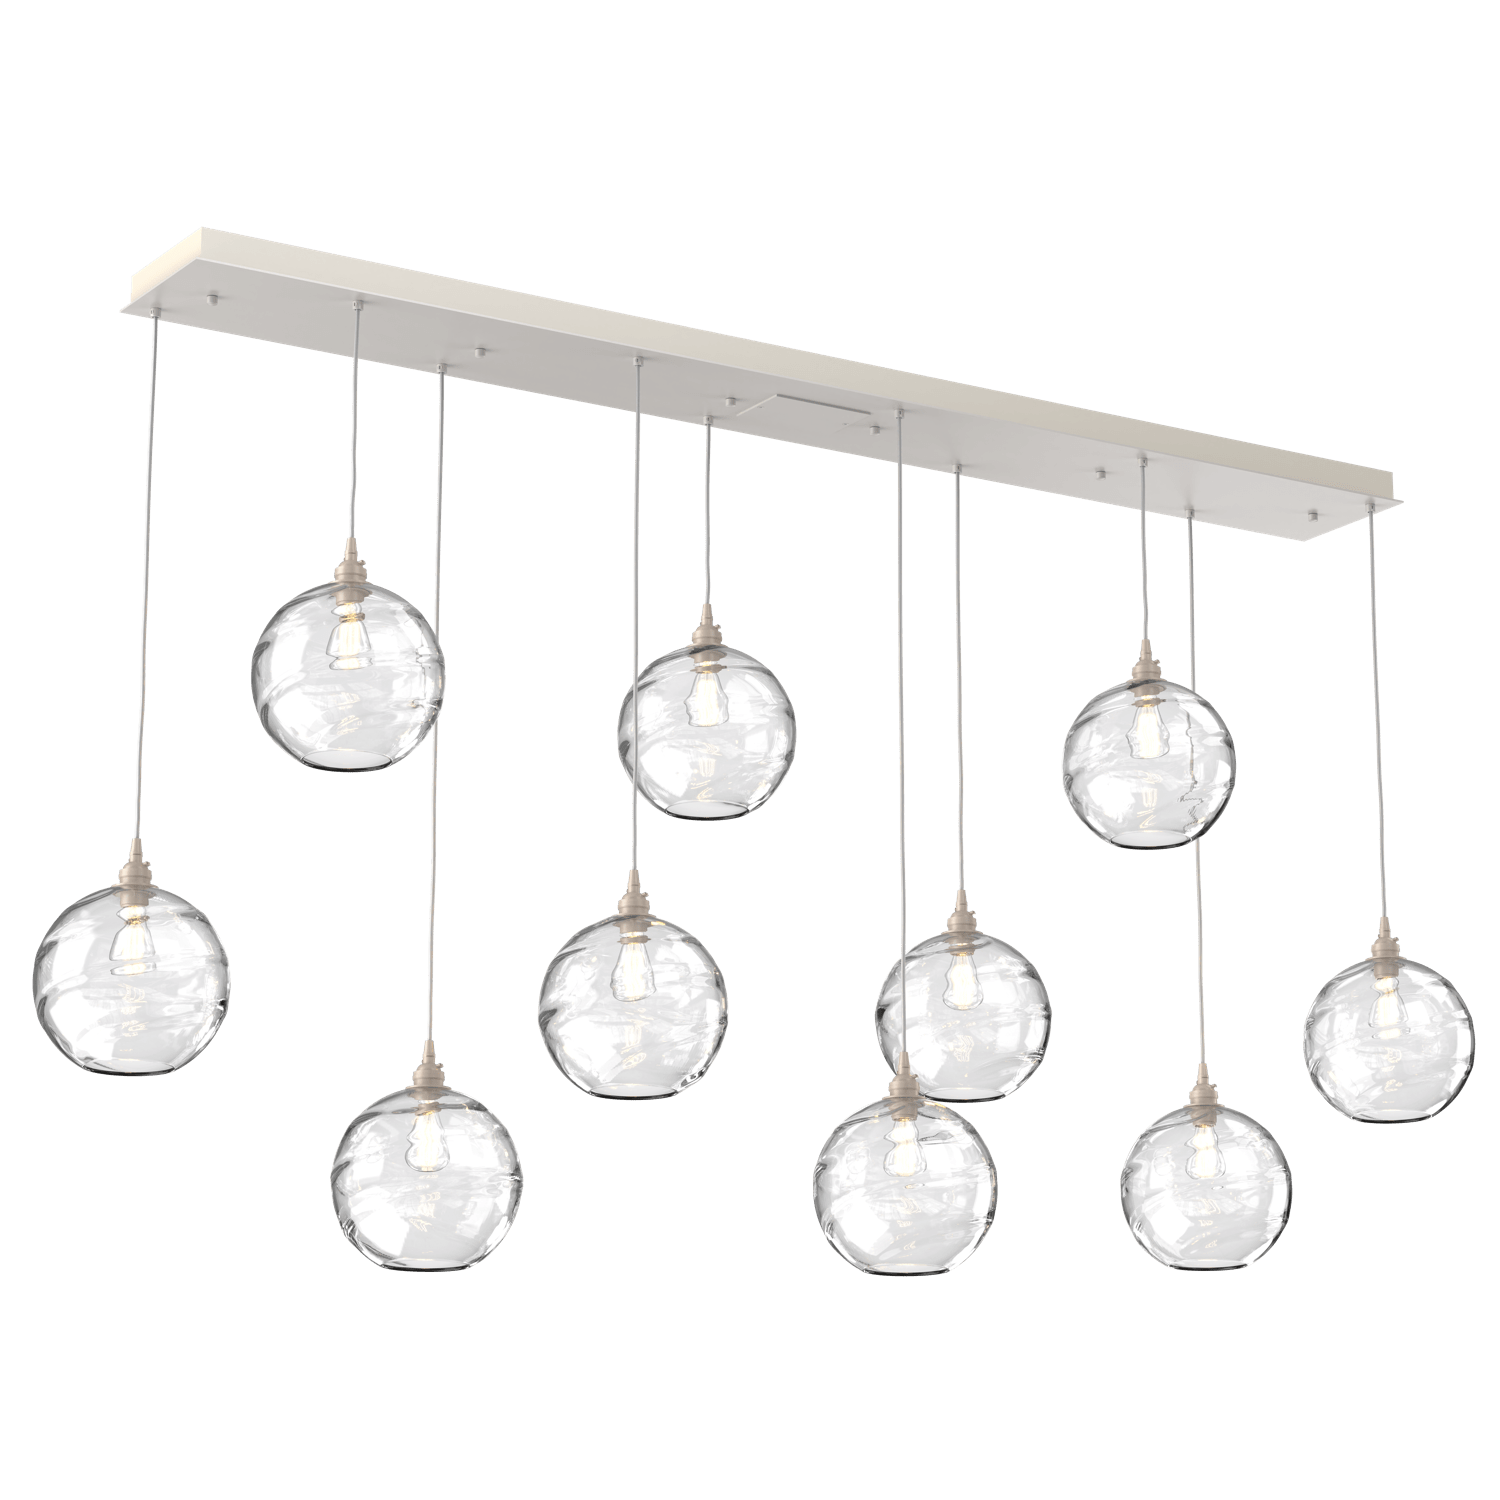 PLB0047-10-BS-OC-Hammerton-Studio-Optic-Blown-Glass-Terra-10-light-linear-pendant-chandelier-with-metallic-beige-silver-finish-and-optic-clear-blown-glass-shades-and-incandescent-lamping